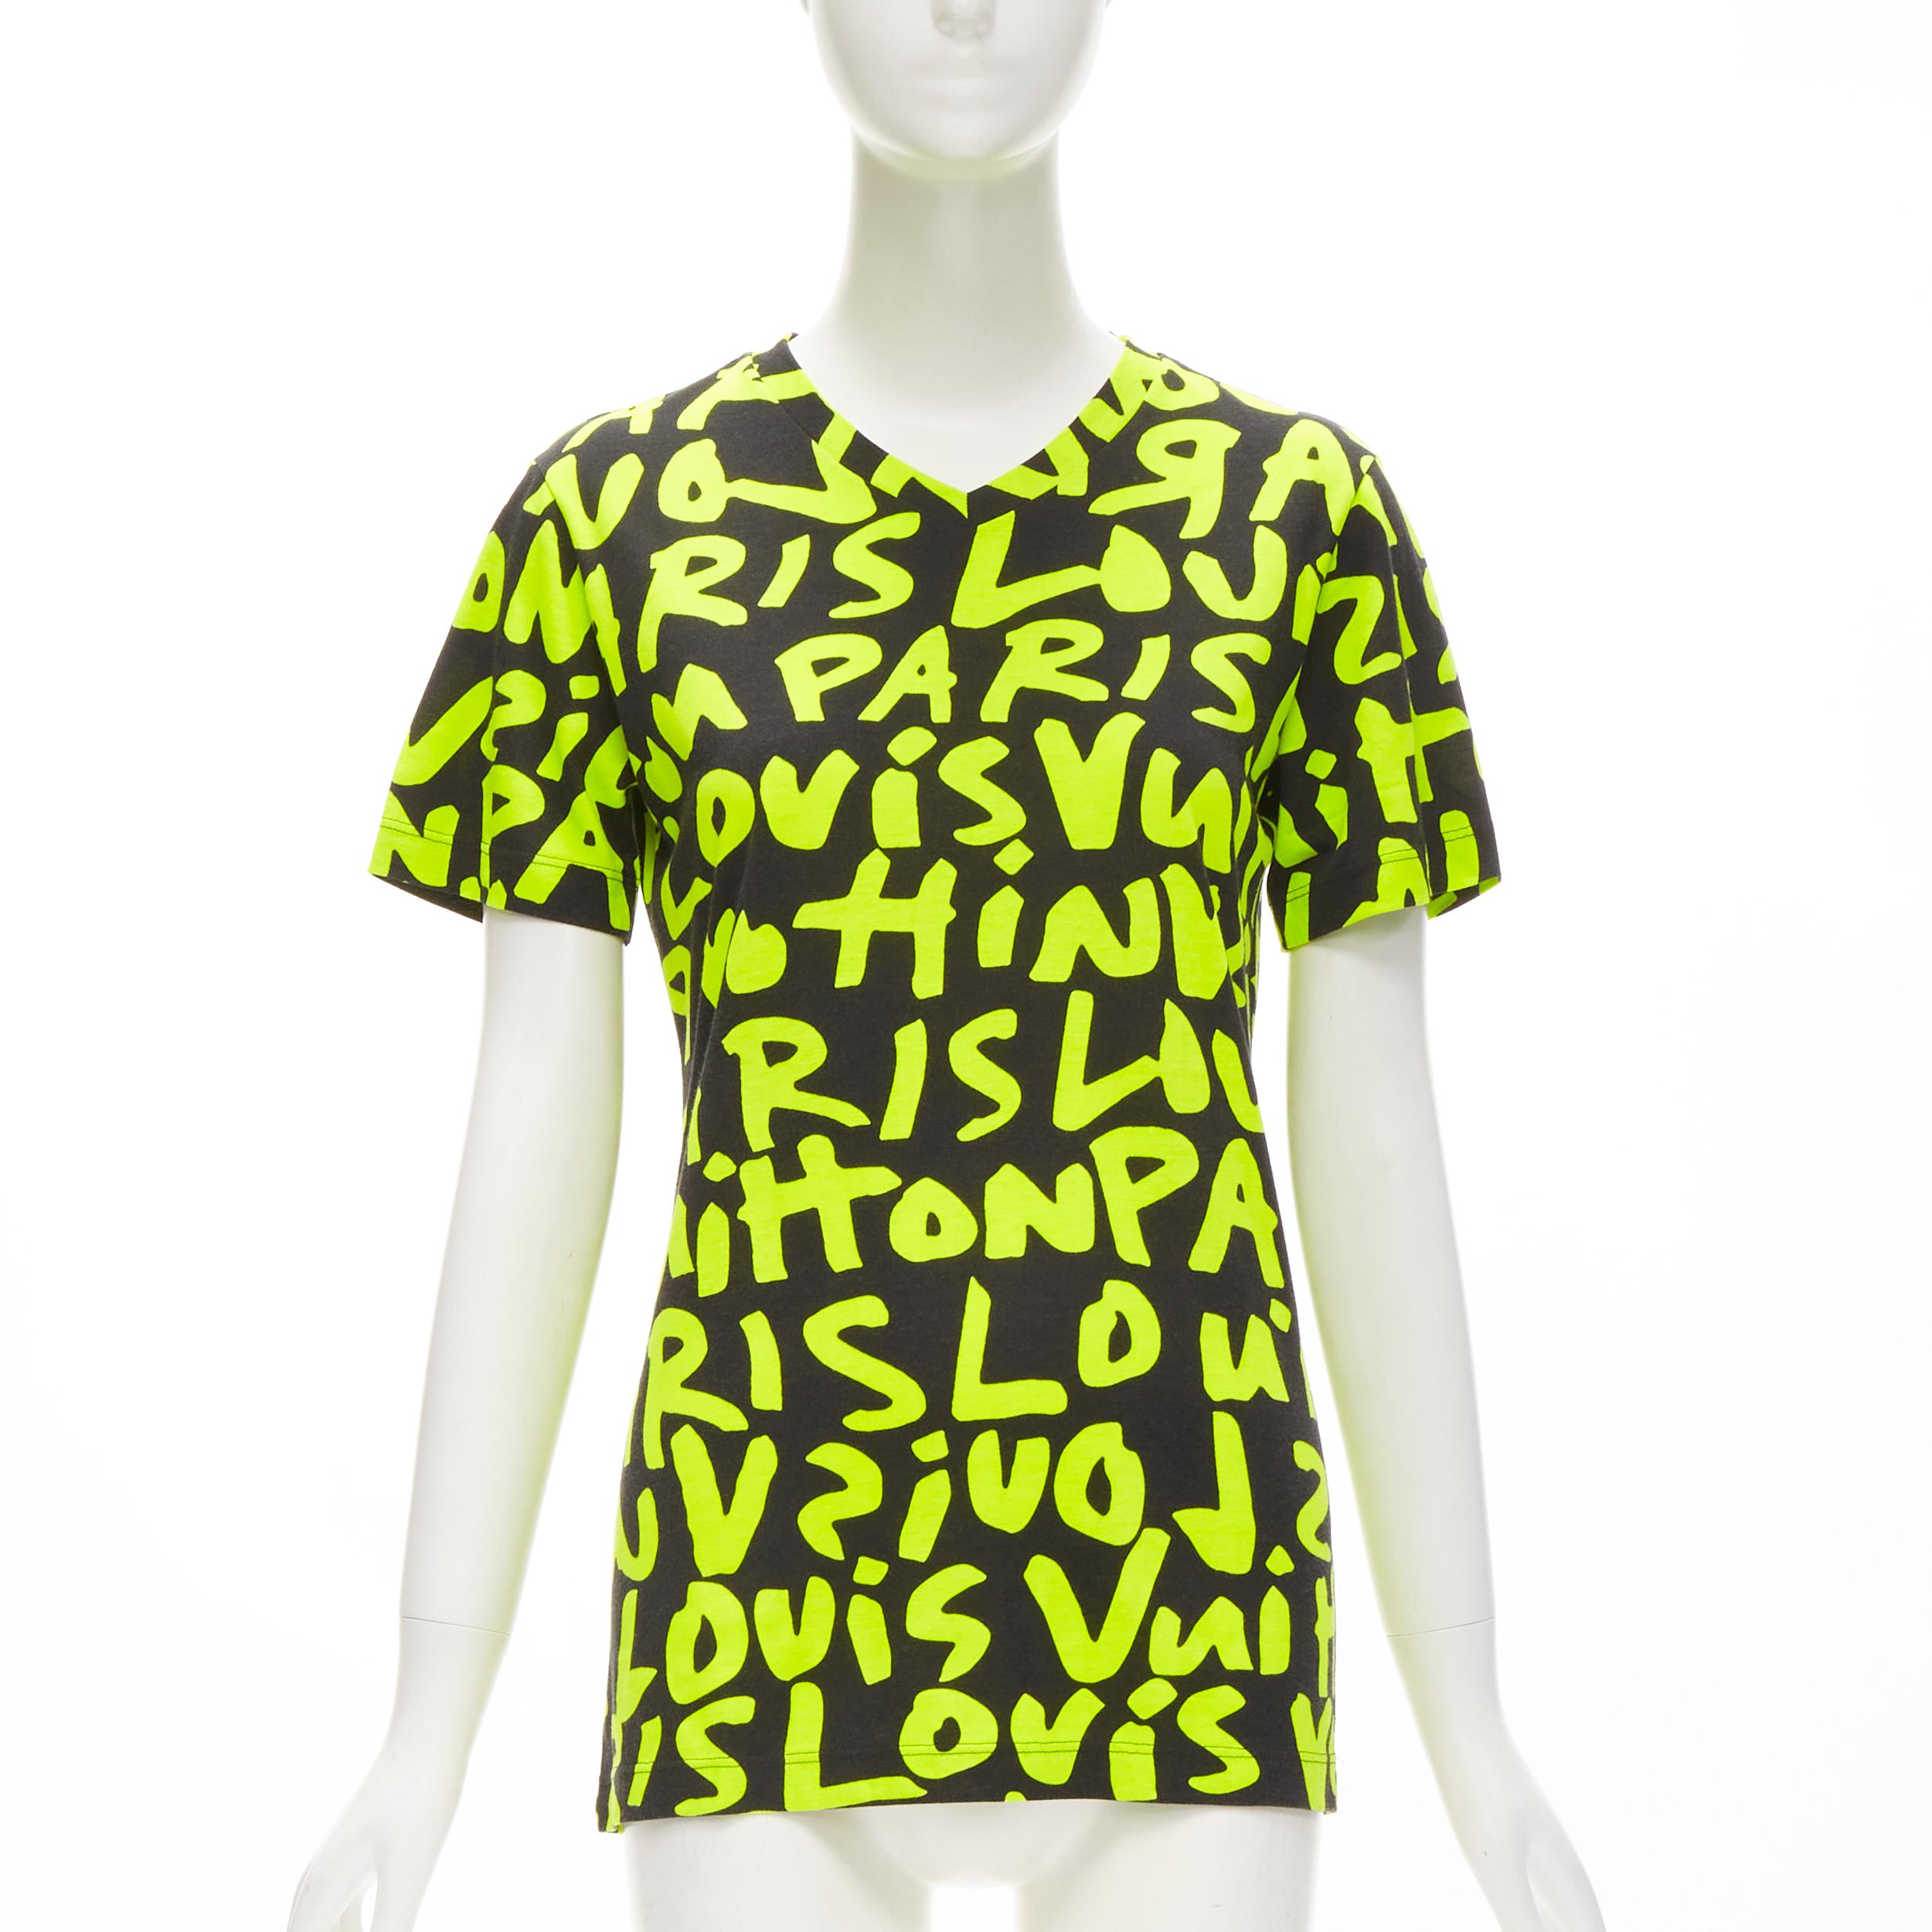 LOUIS VUITTON Stephen Sprouse Iconic Graffiti black neon yellow tshirt For Sale